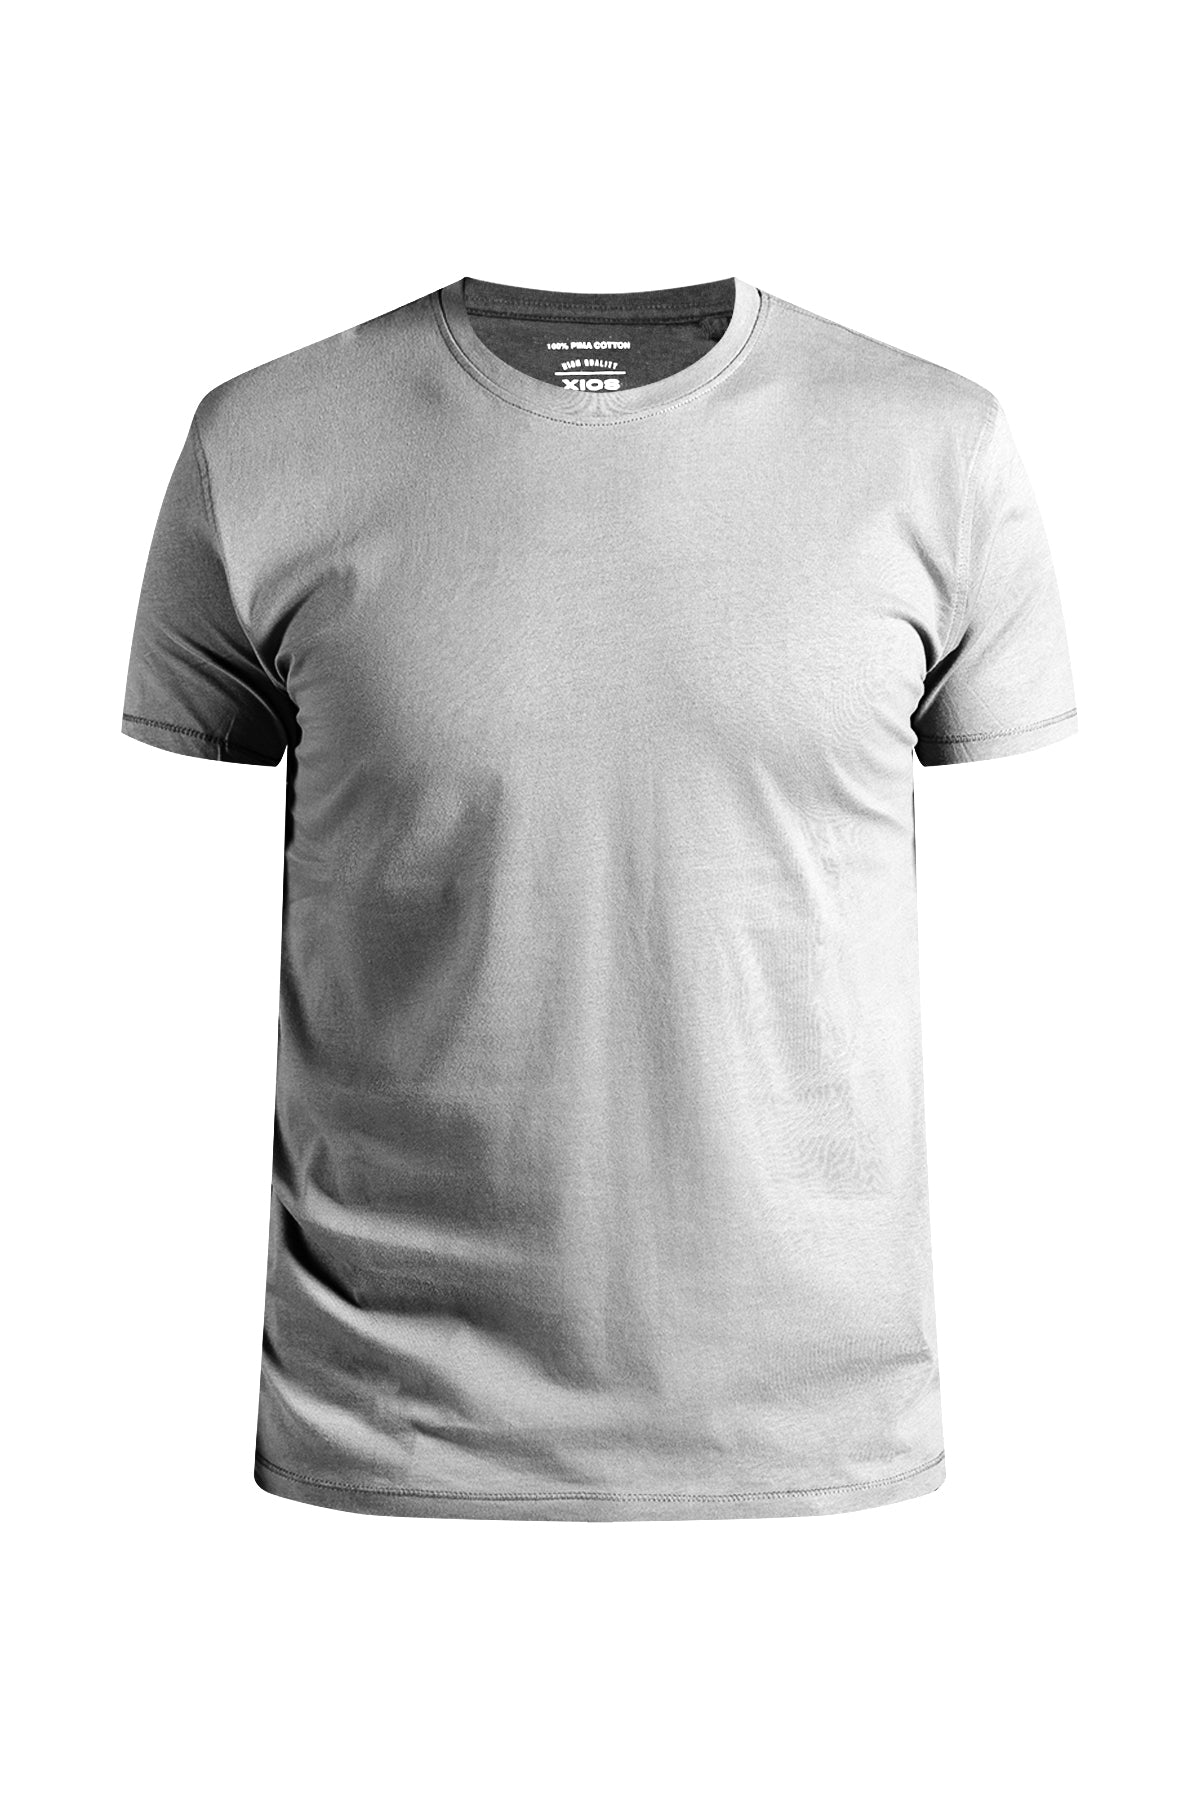 The New Fit Basic Tee (Crew Neck) - XIOS America